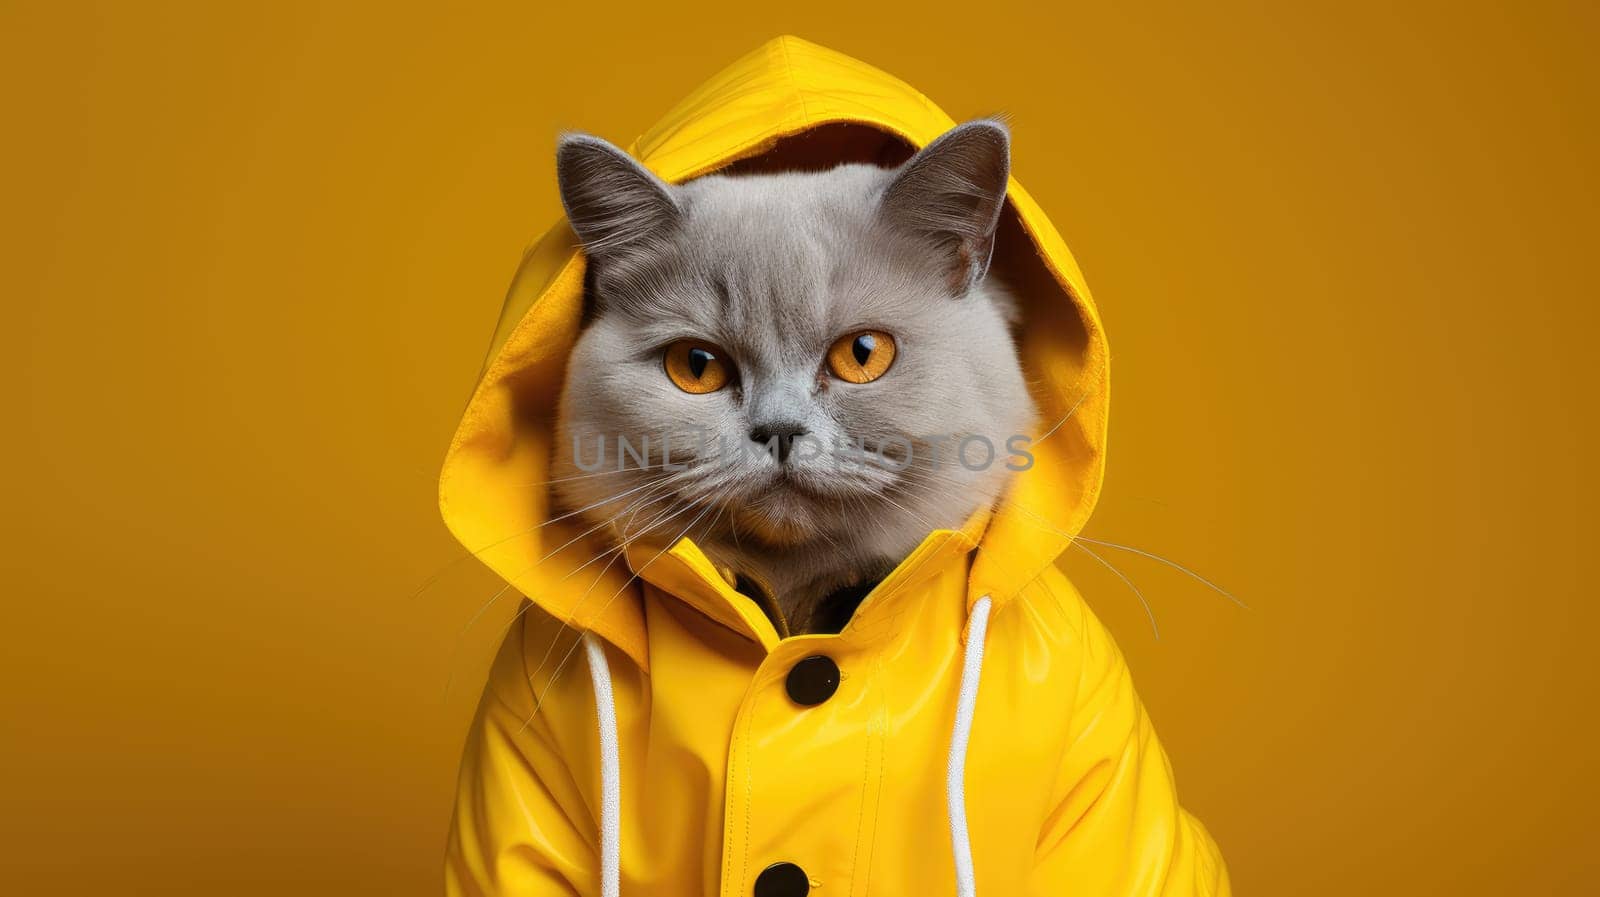 Hipster cat in a coat on a yellow background by natali_brill